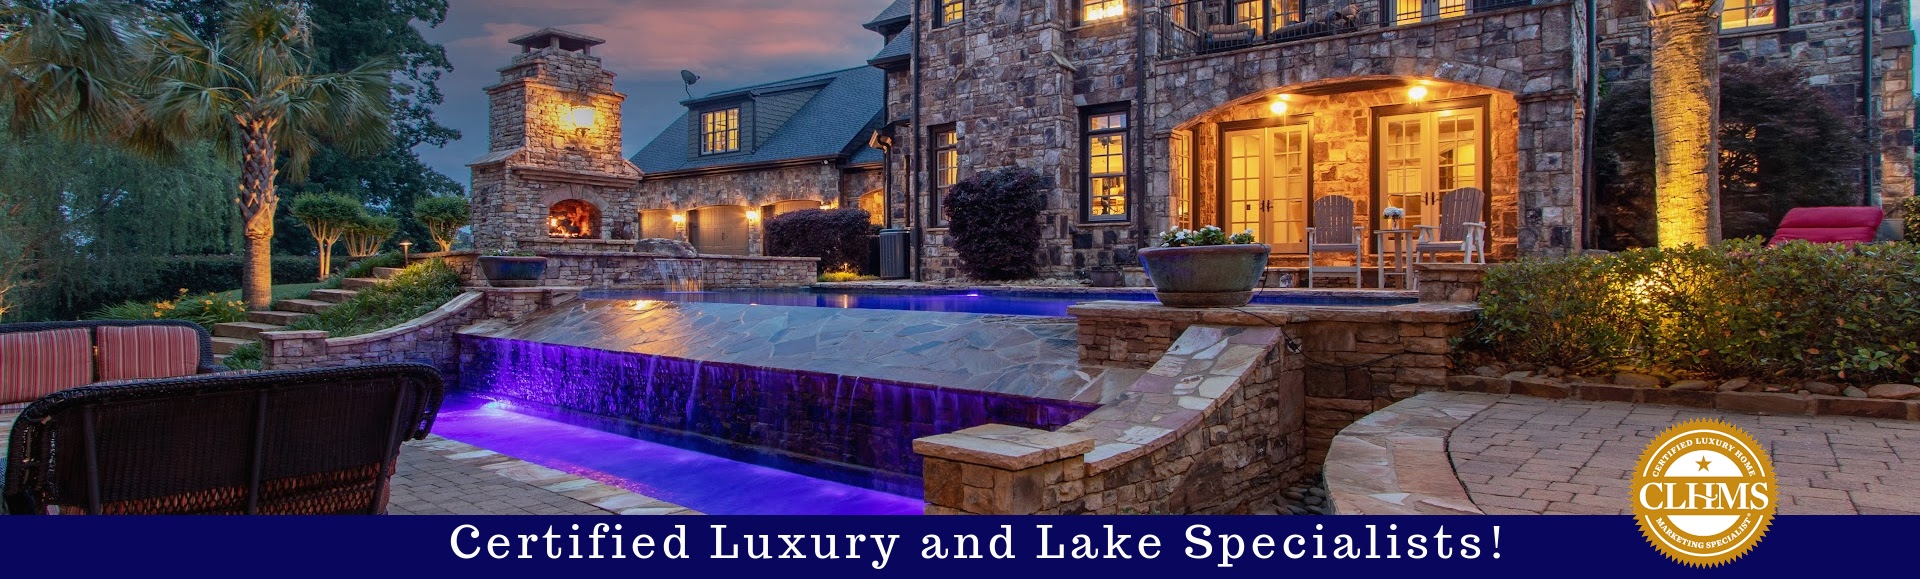 2-2e Certified Luxury And Lake Specialists copy